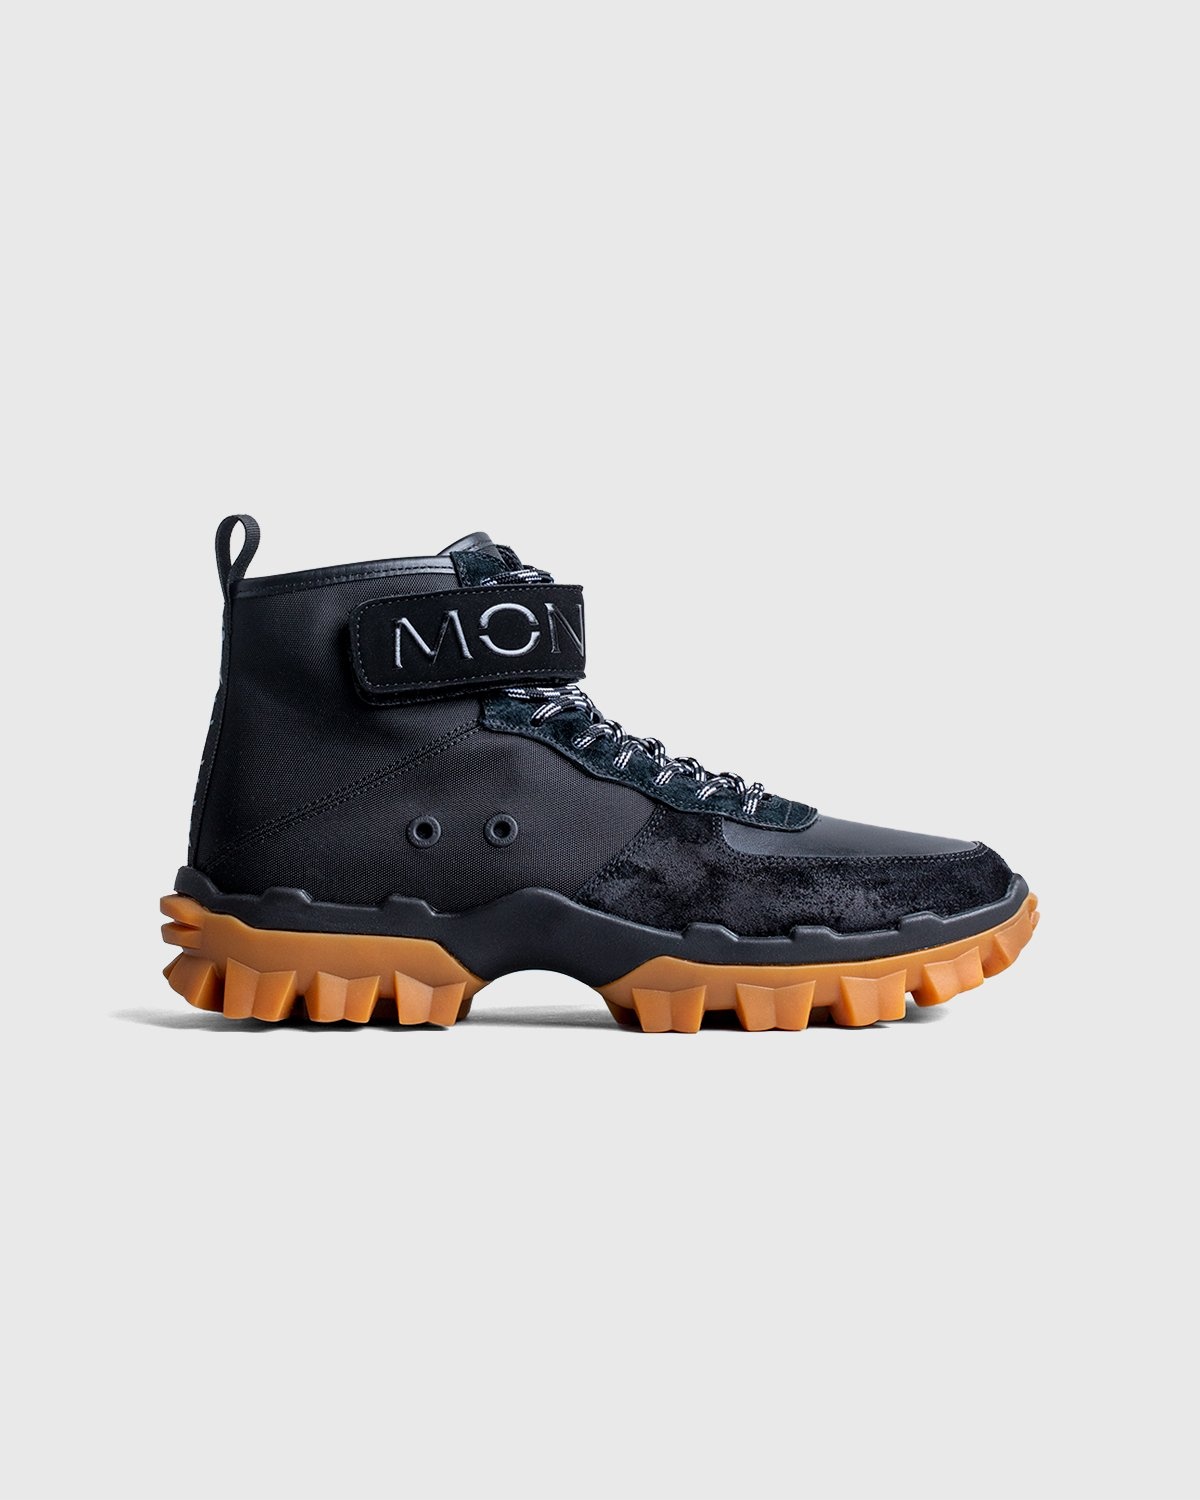 Moncler Genius – Recycled Hugo Shoes - Hiking Boots - Black - Image 1